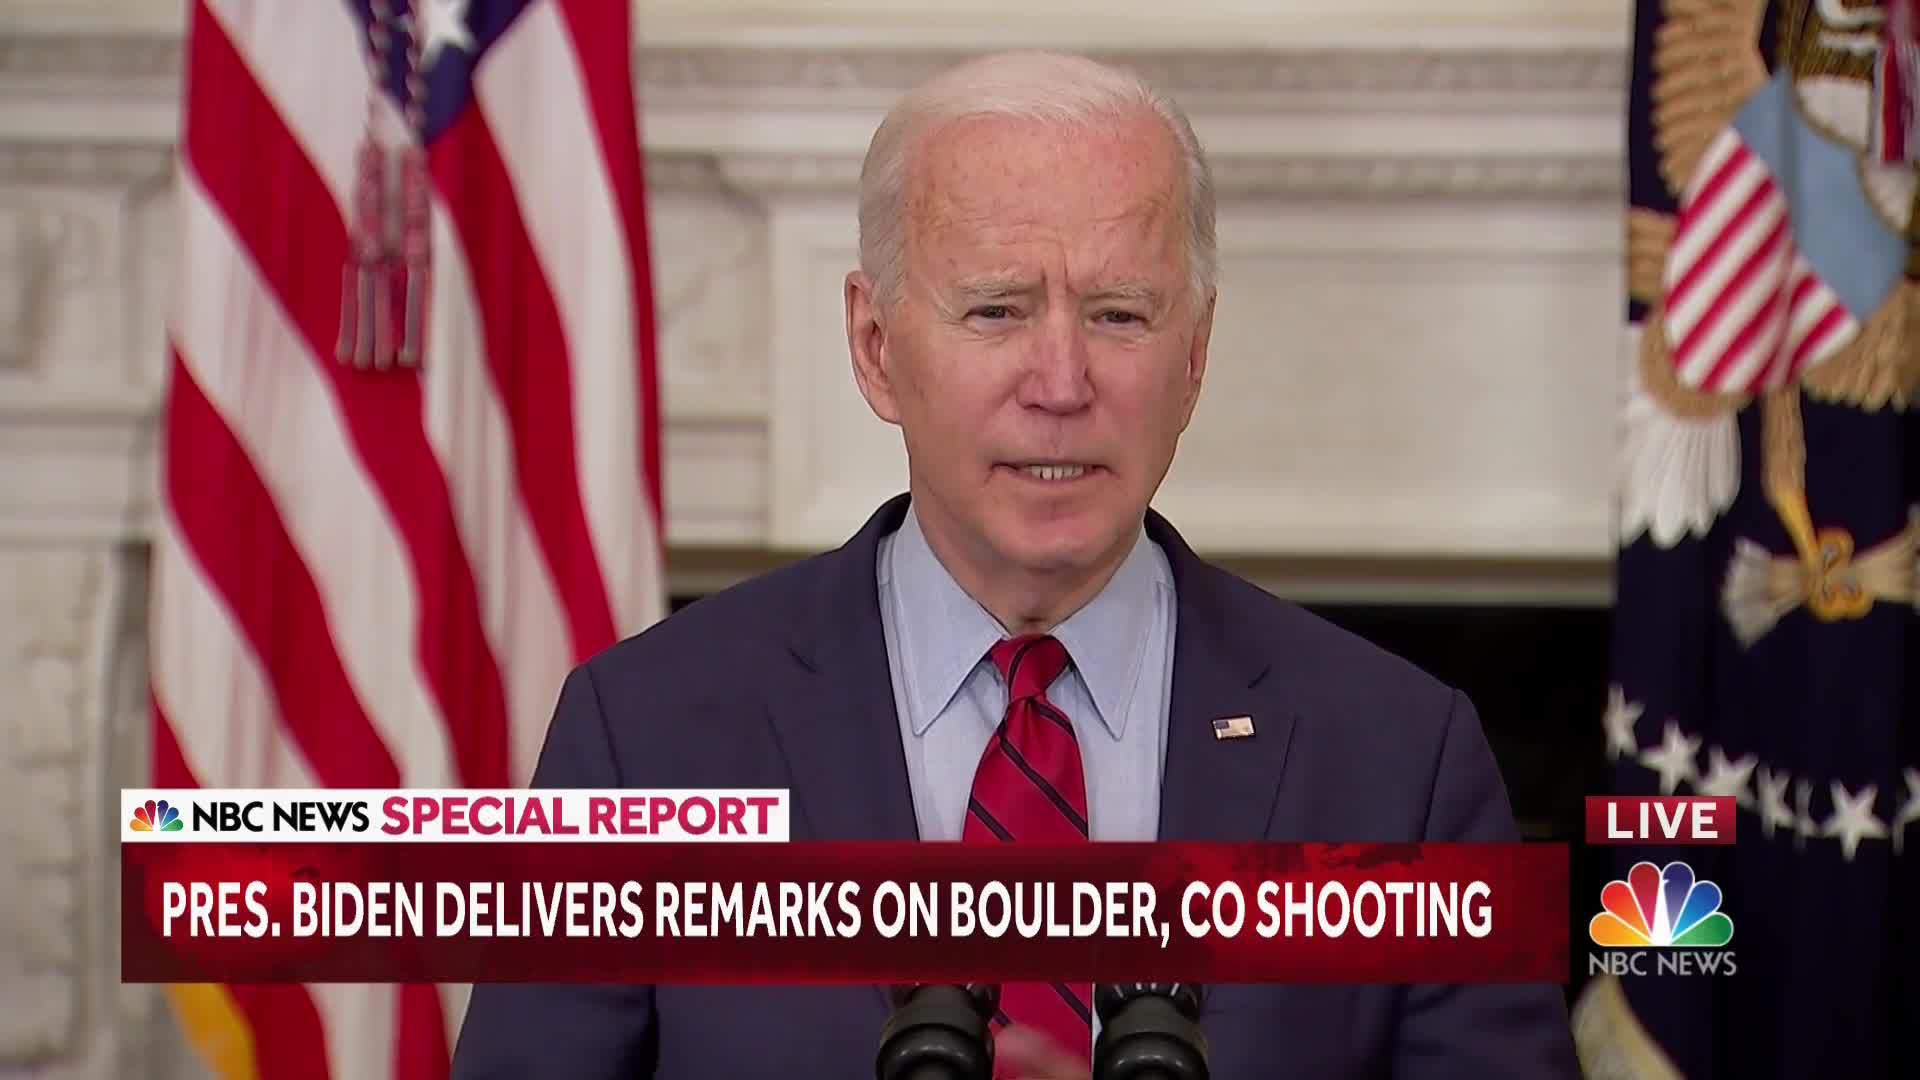 WATCH: President Biden comments on Colorado shooting that left 10 dead